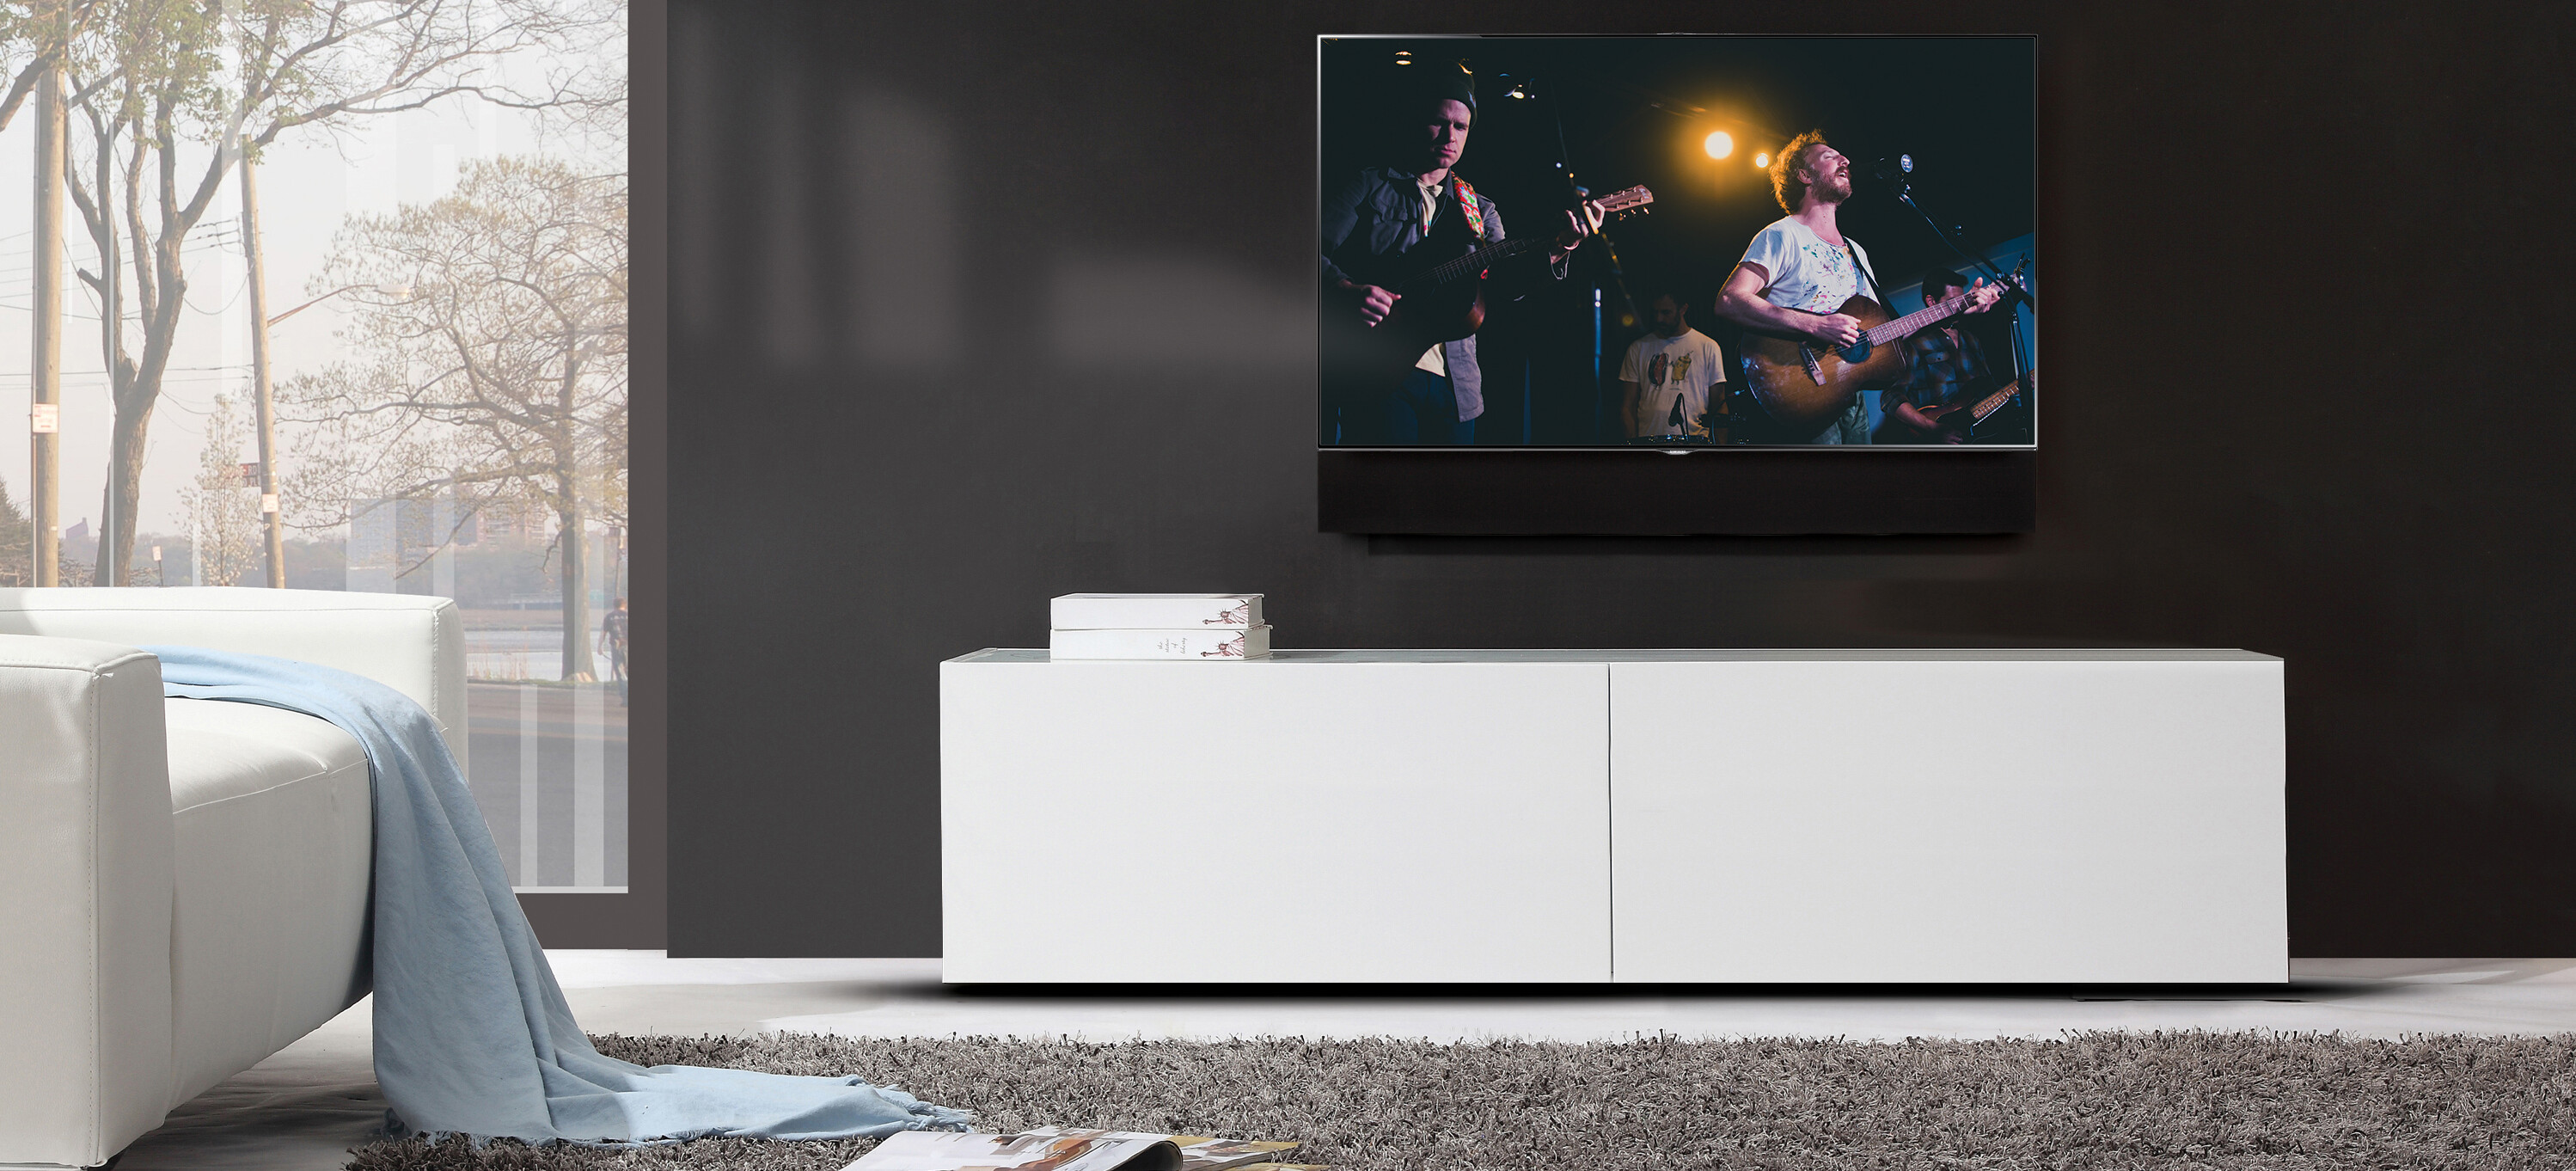 Wall Mounted Hi-Def Flat Panel TV With Architectural Loudspeakers in a Modern Living Room